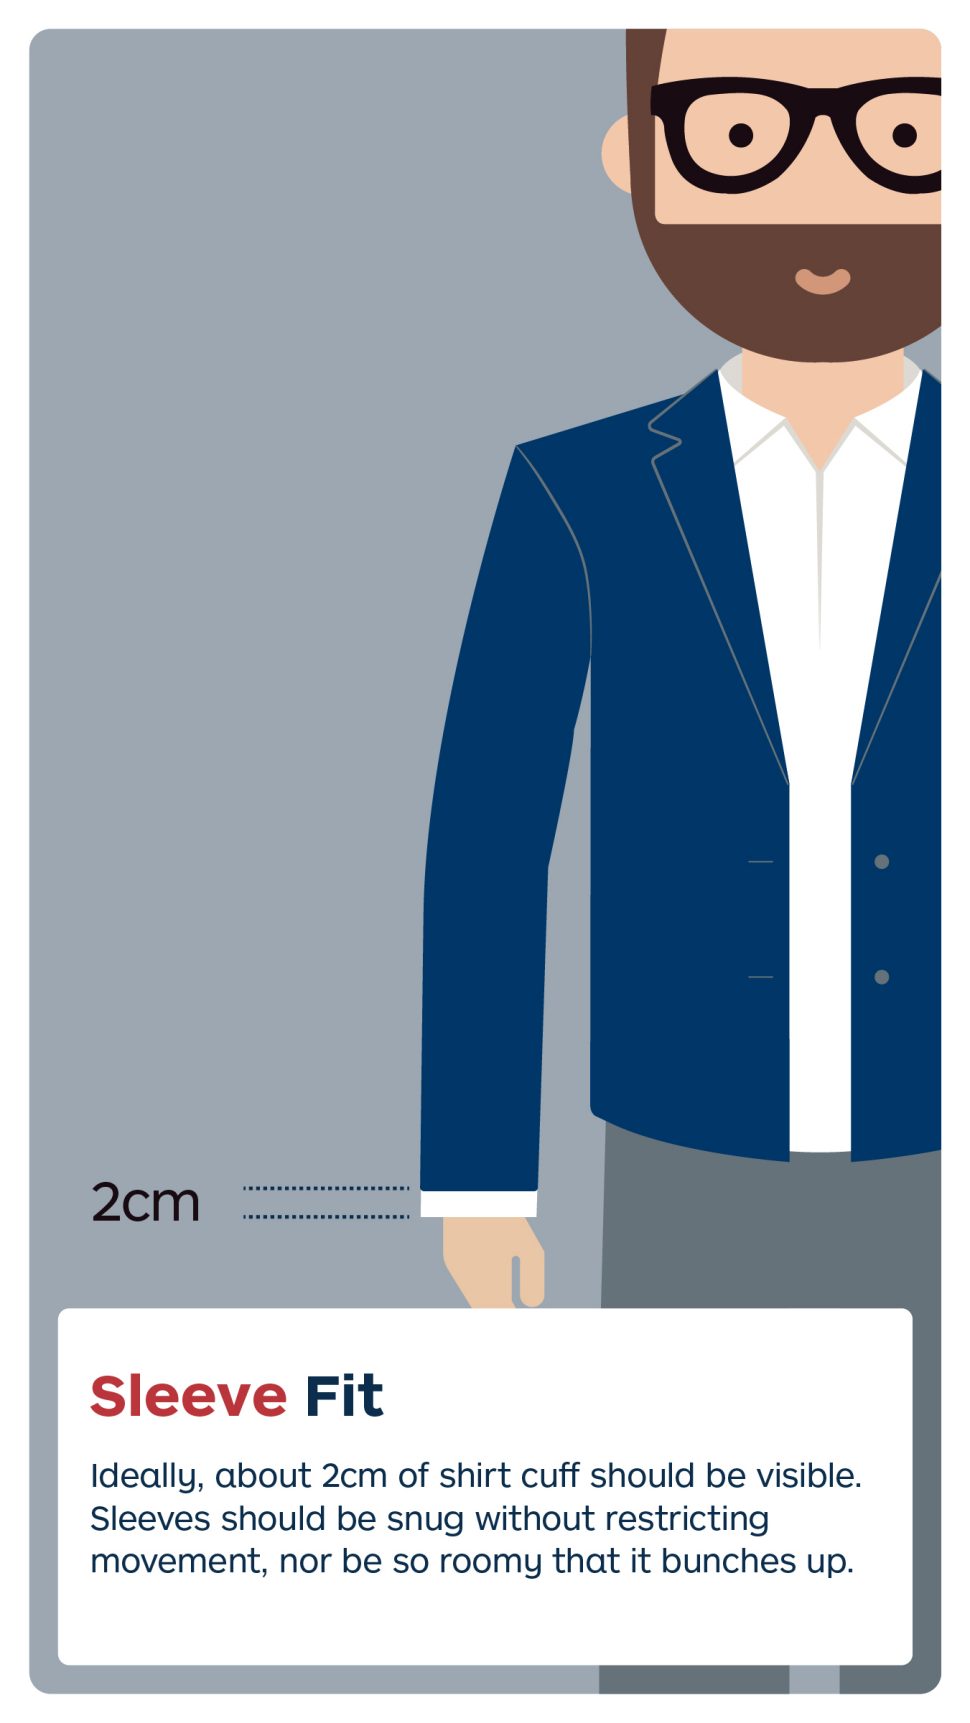 Ideally, about 2cm of shirt cuff should be visible. Sleeves should be snug without restricting movement, nor be so roomy that it bunches up.